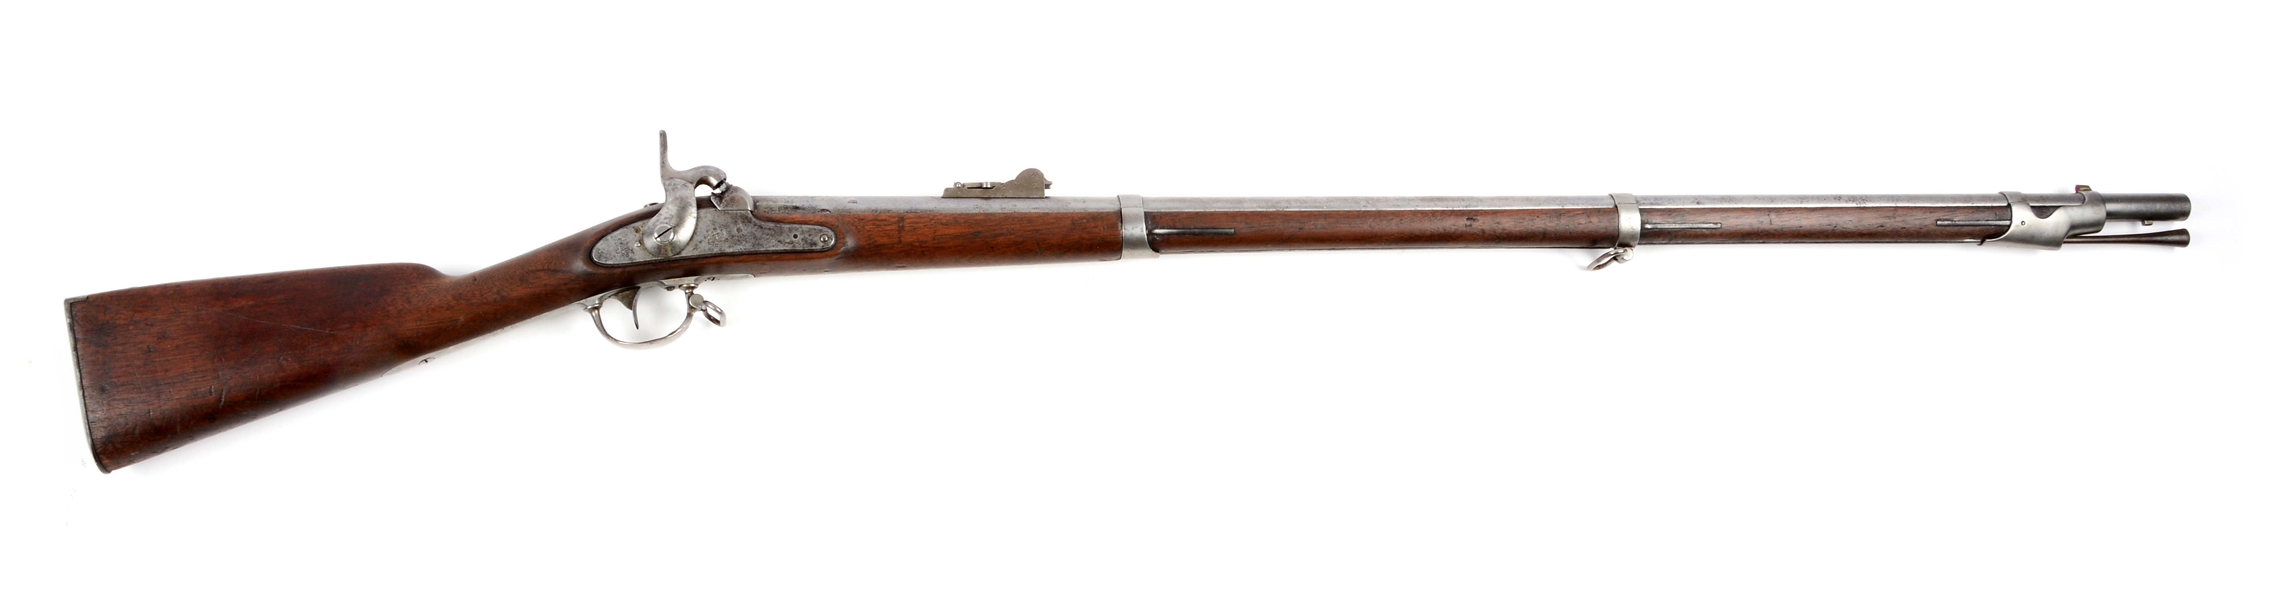 (A) U.S. MODEL 1842 RIFLED & SIGHTED MUSKET.